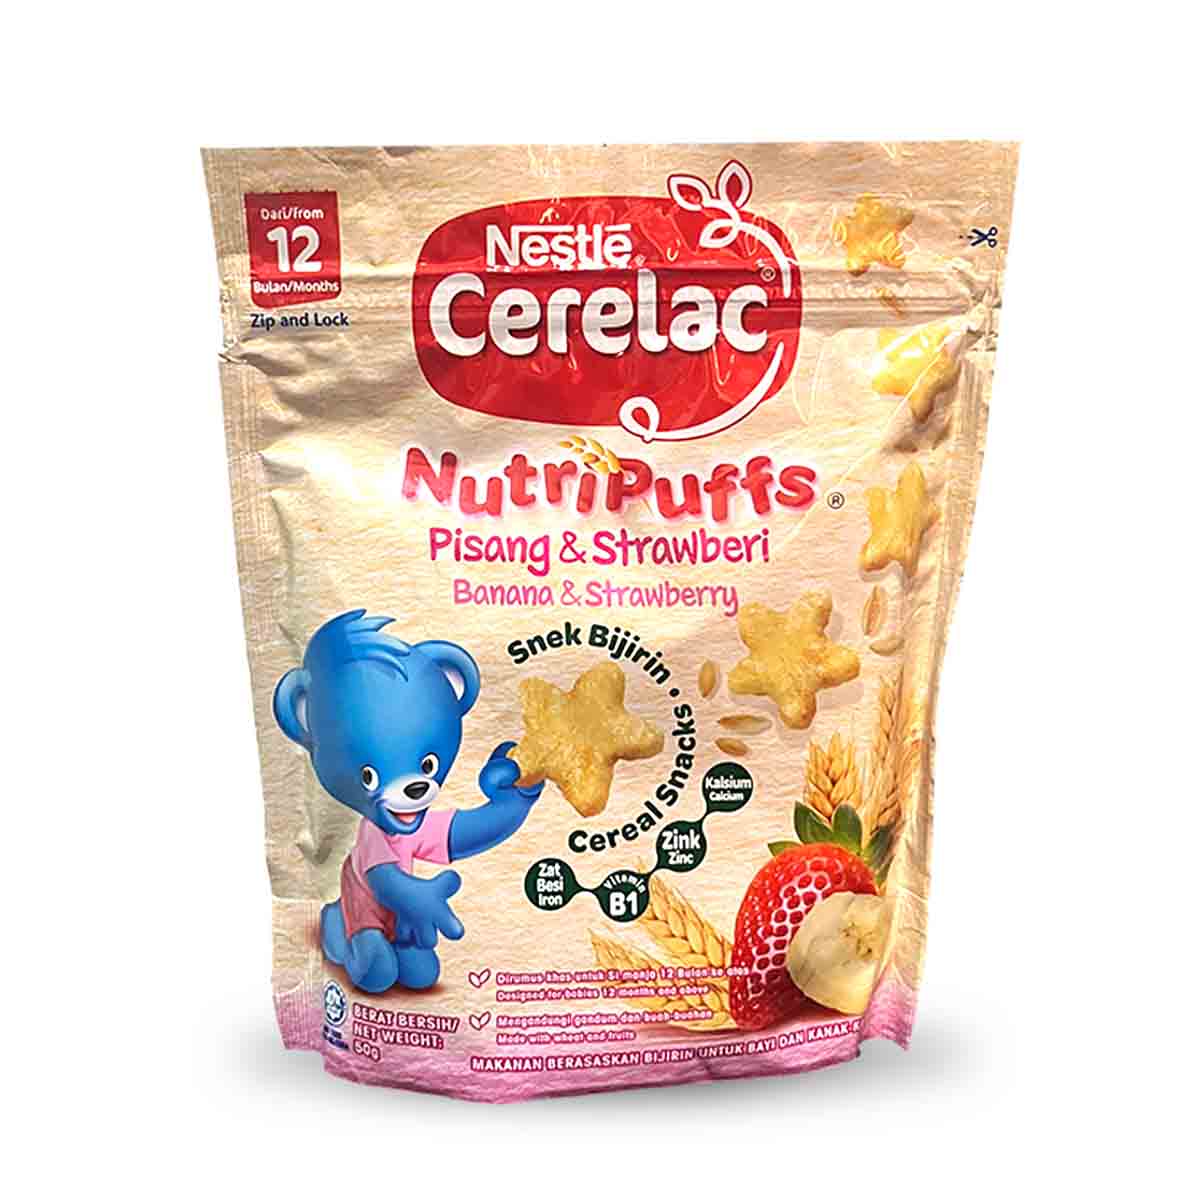 Buy Nestle Cerelac Nutri Puffs with Banana & Strawberry Baby Snack Online in India at uyyaala.com